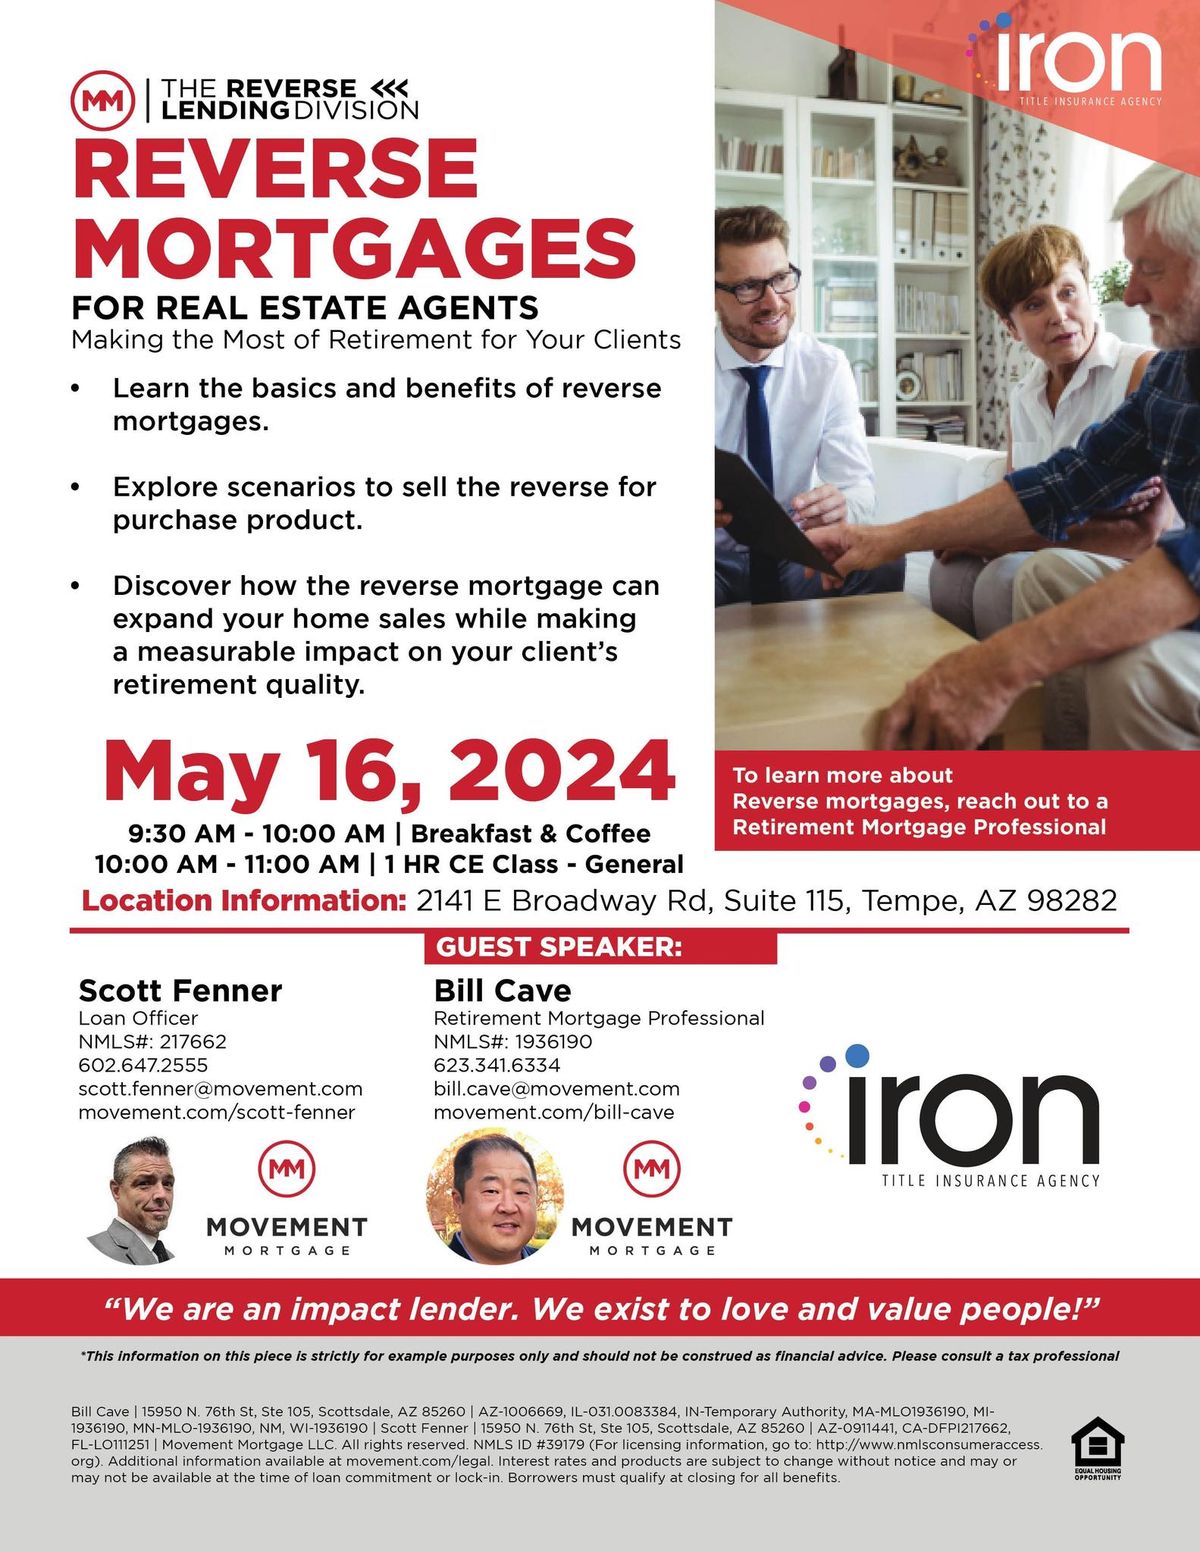 Reverse Mortgages for Real Estate Agents 